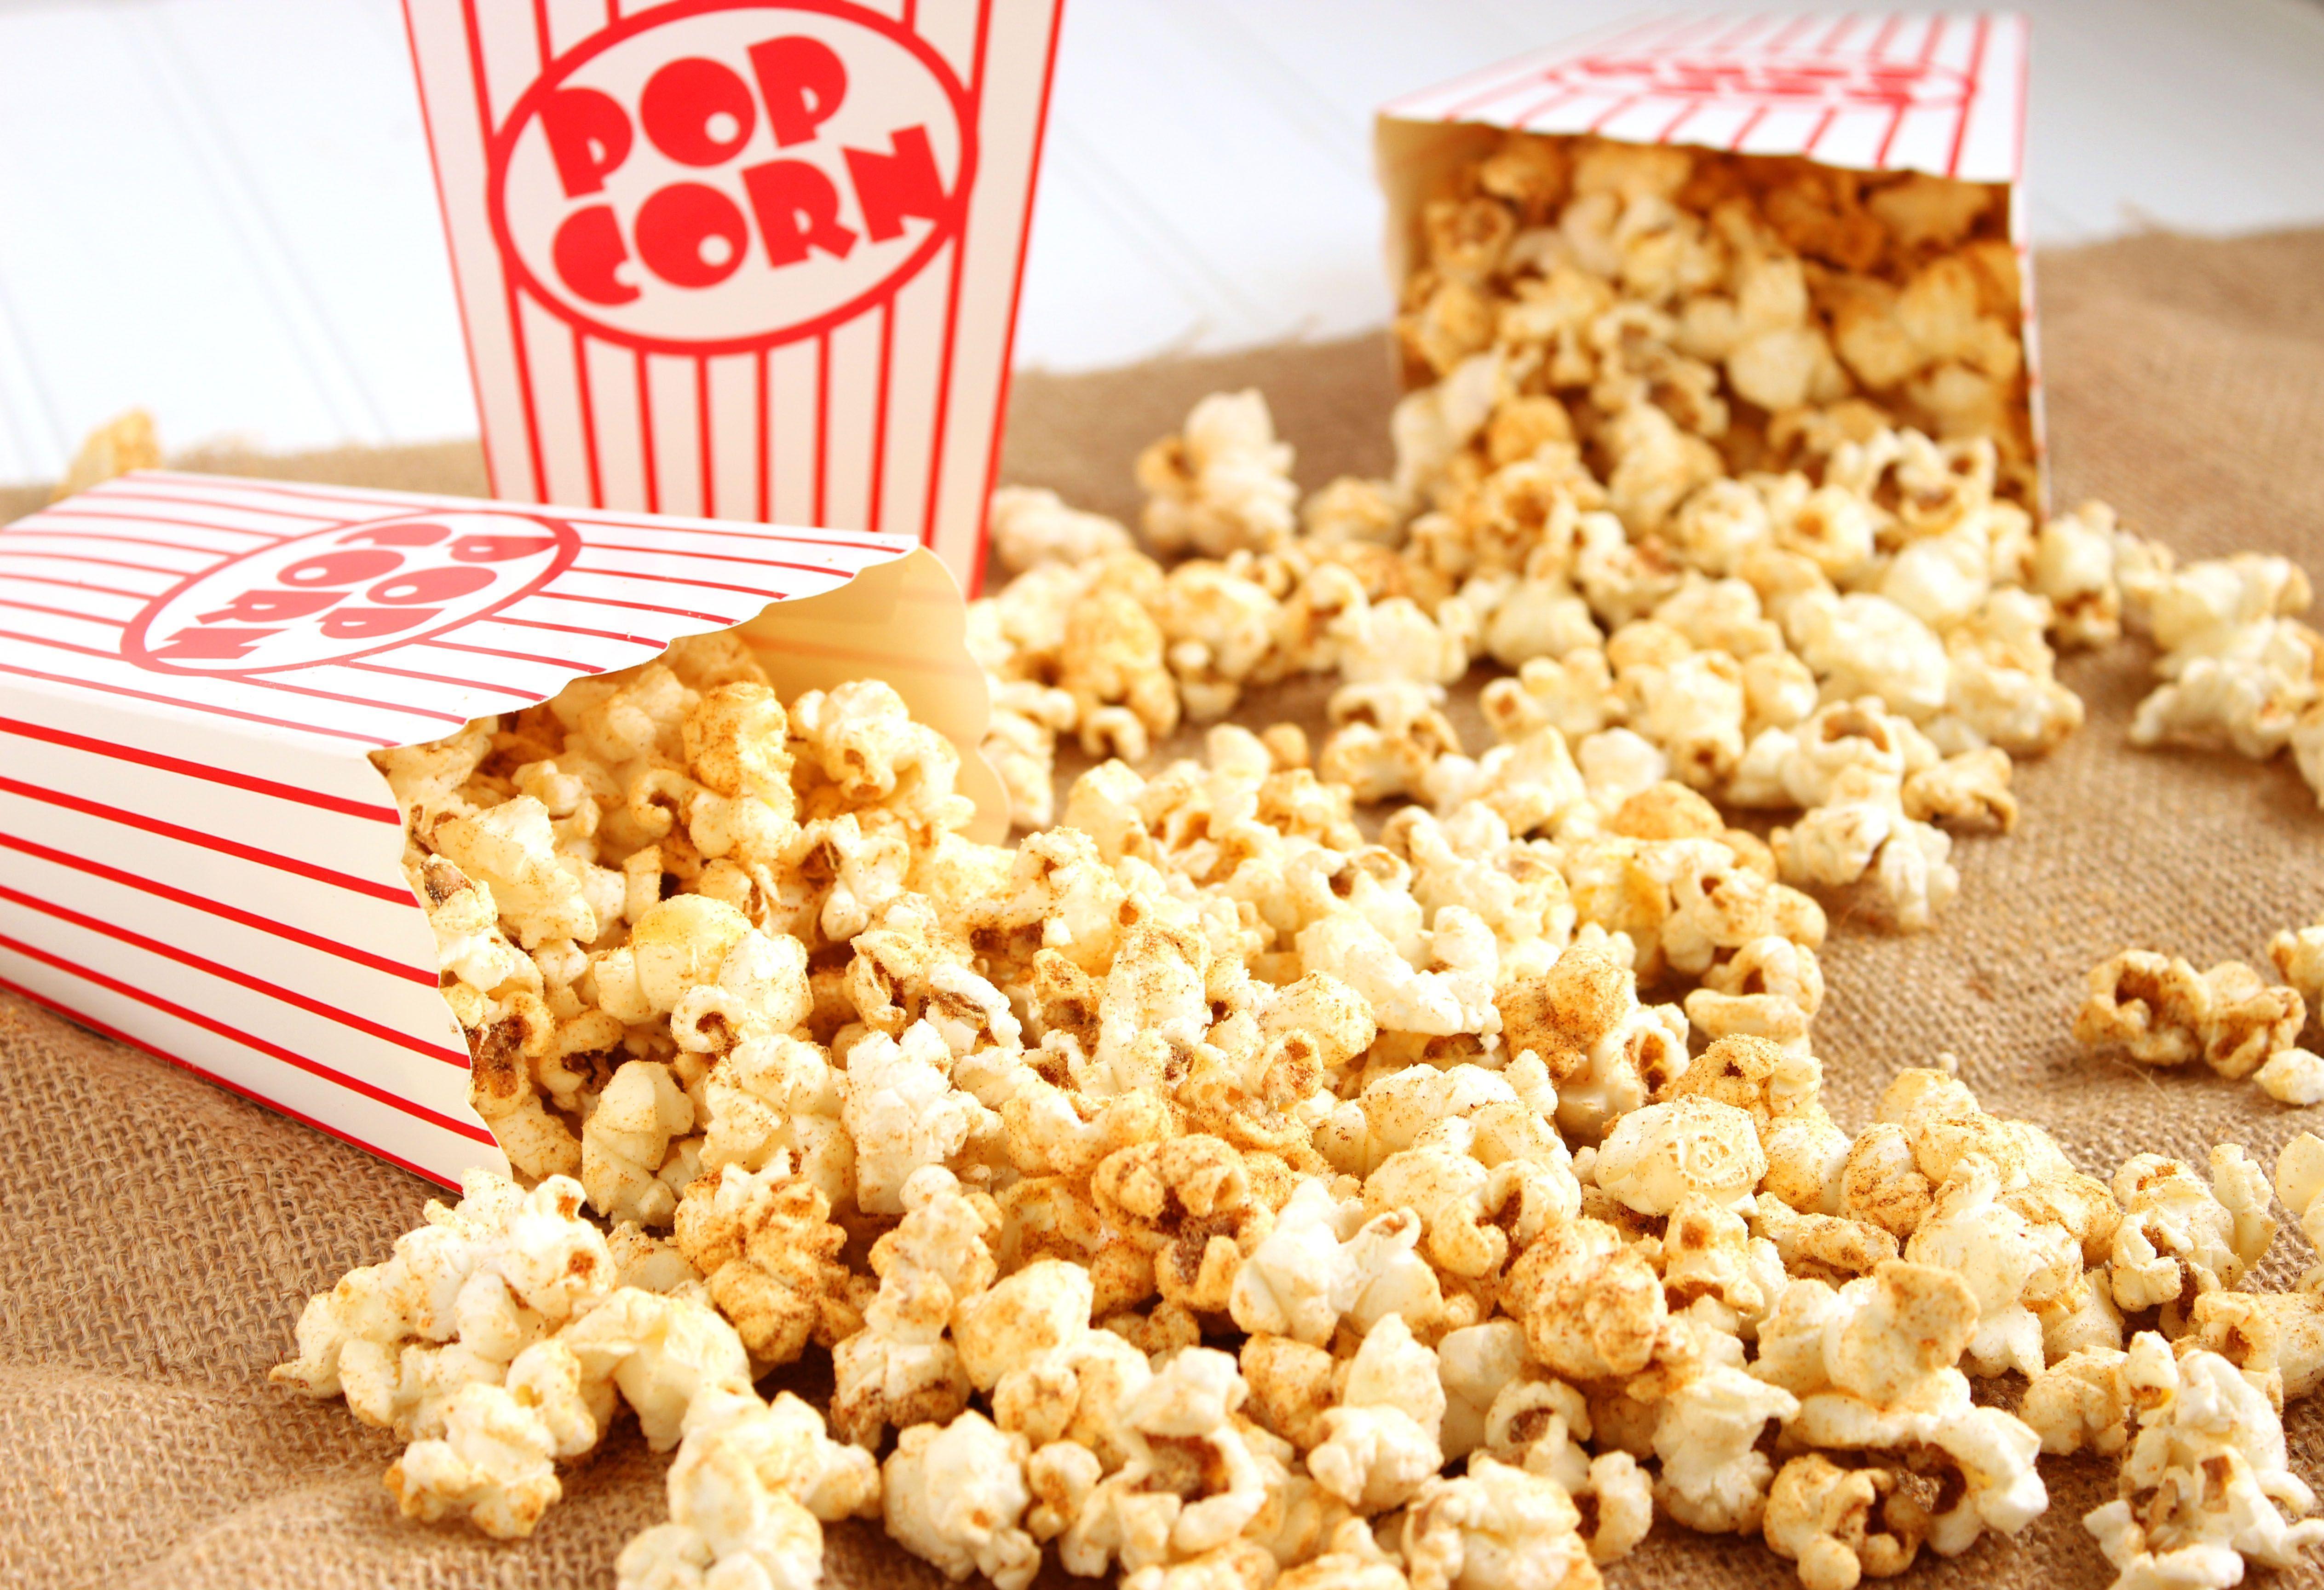 Popcorn Wallpapers High Quality.